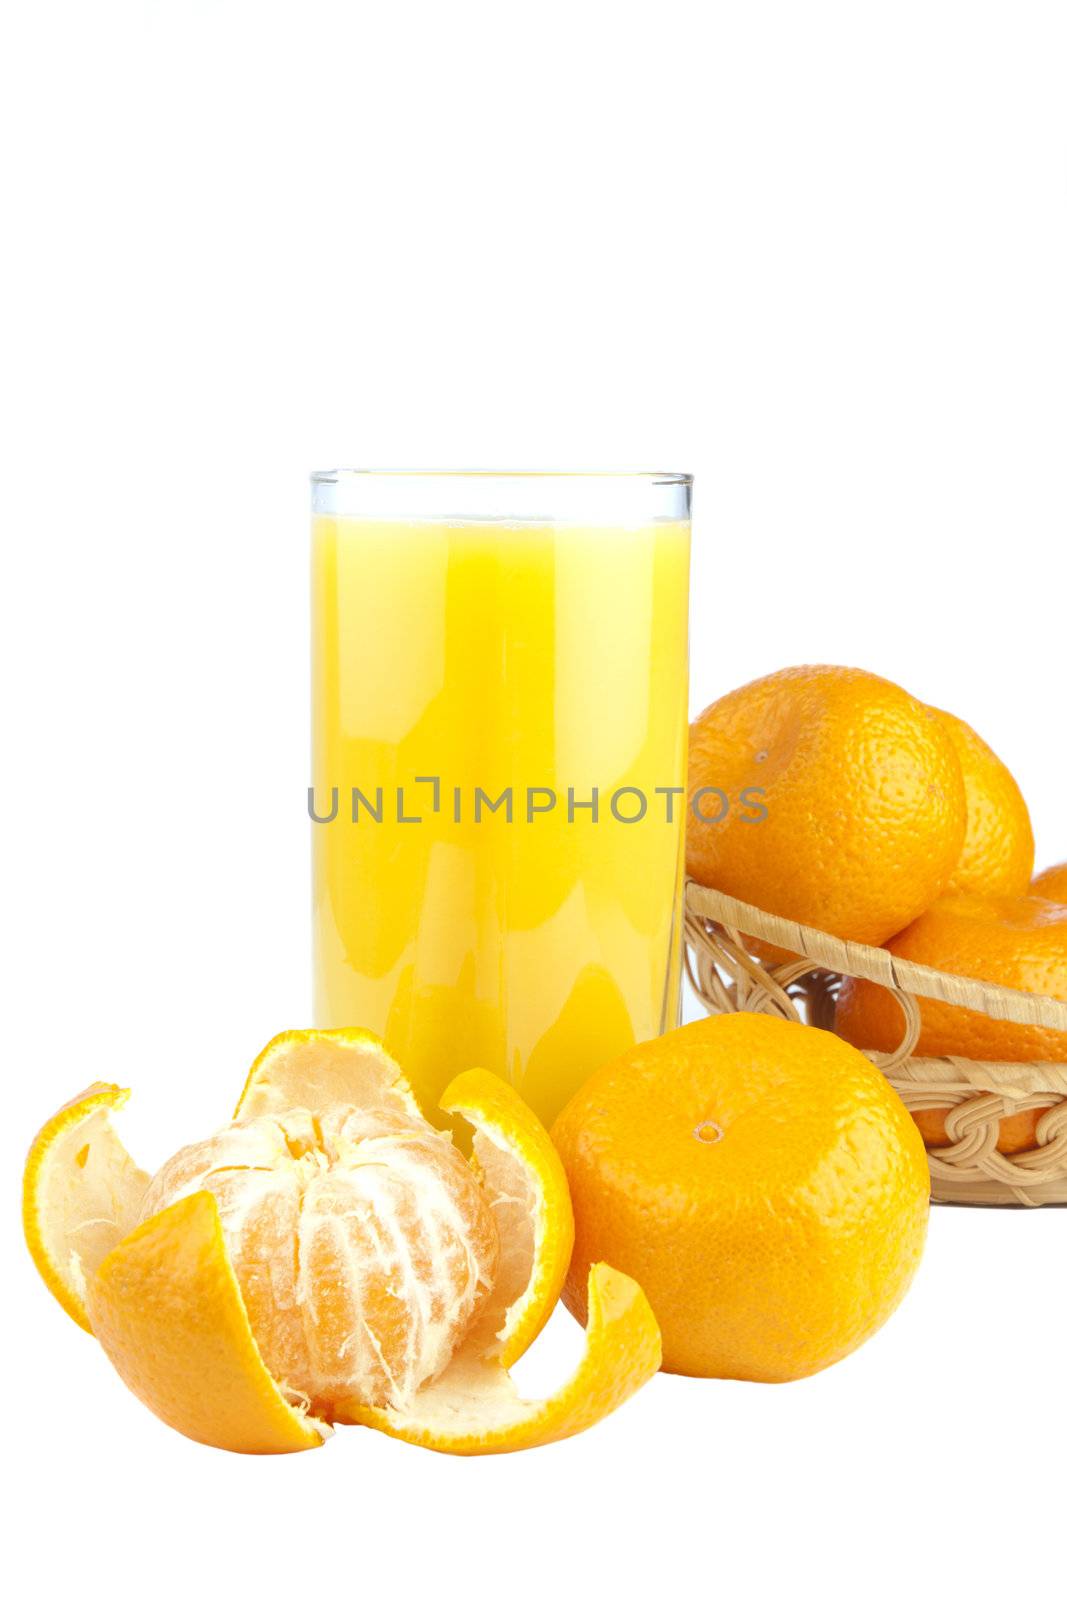 Tangerines and juice glass isolated on white background by DGolbay